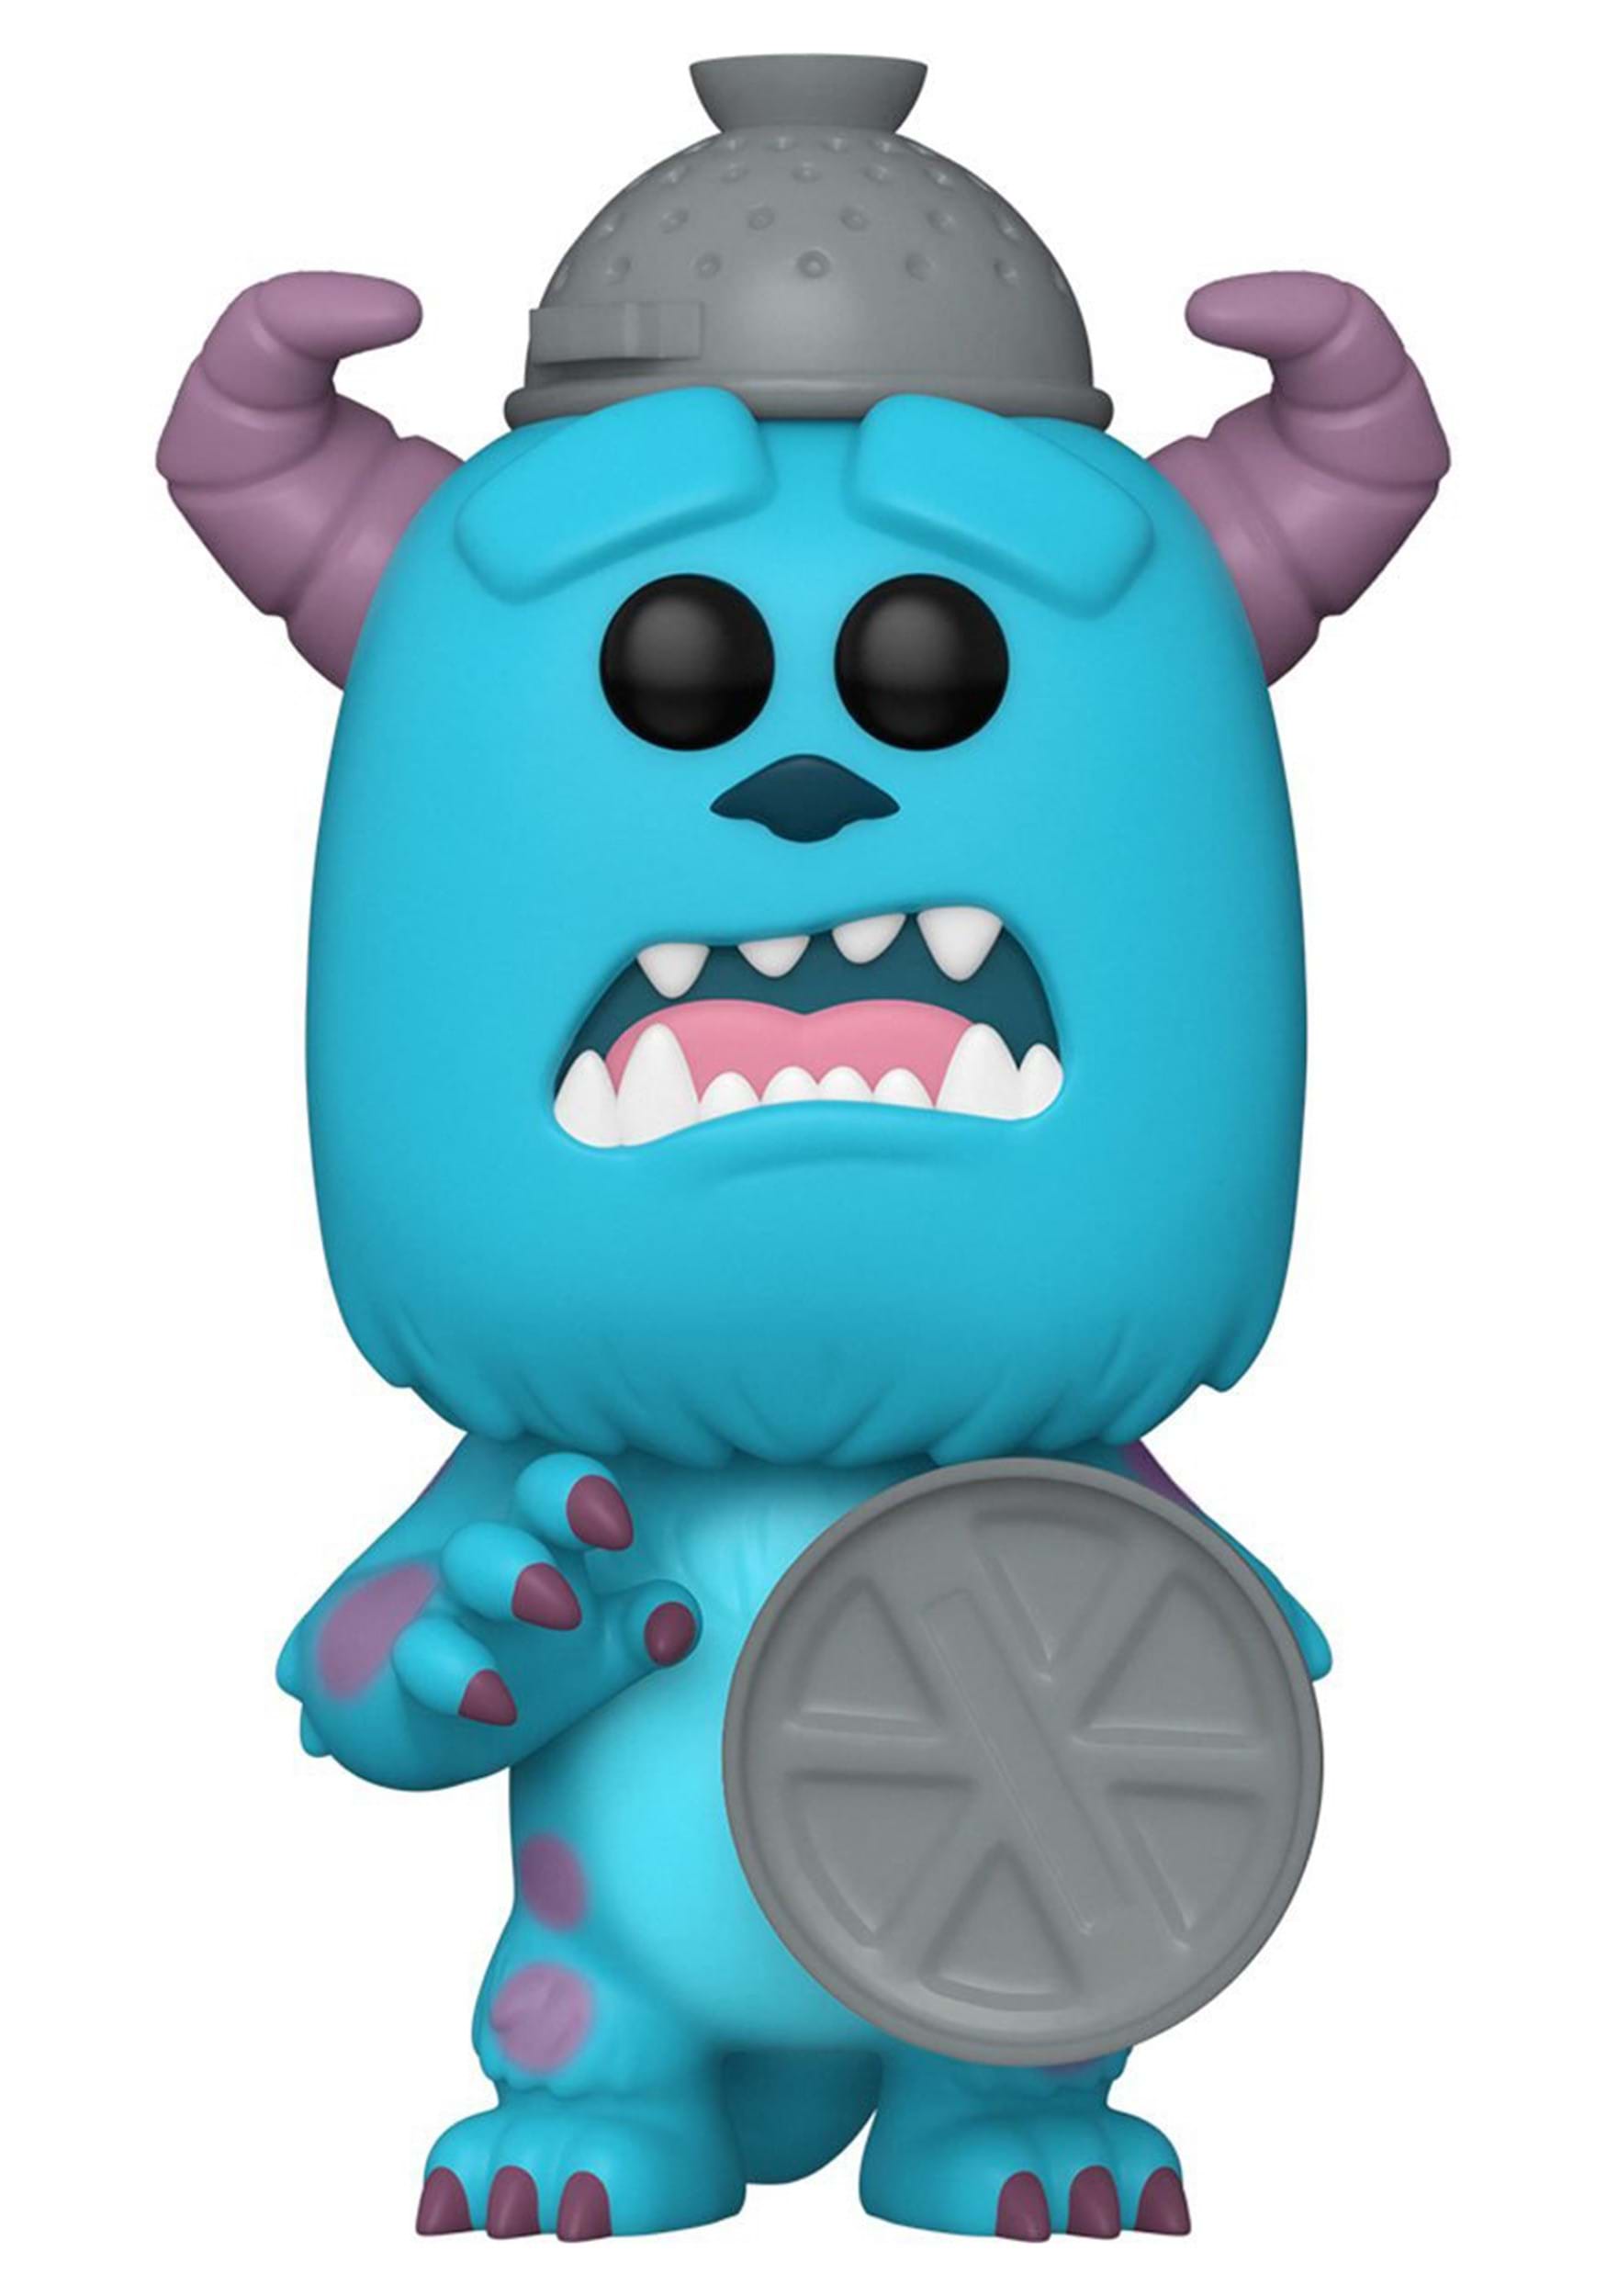 Funko POP Disney: Monsters Inc 20th- Sulley With Lid Figure